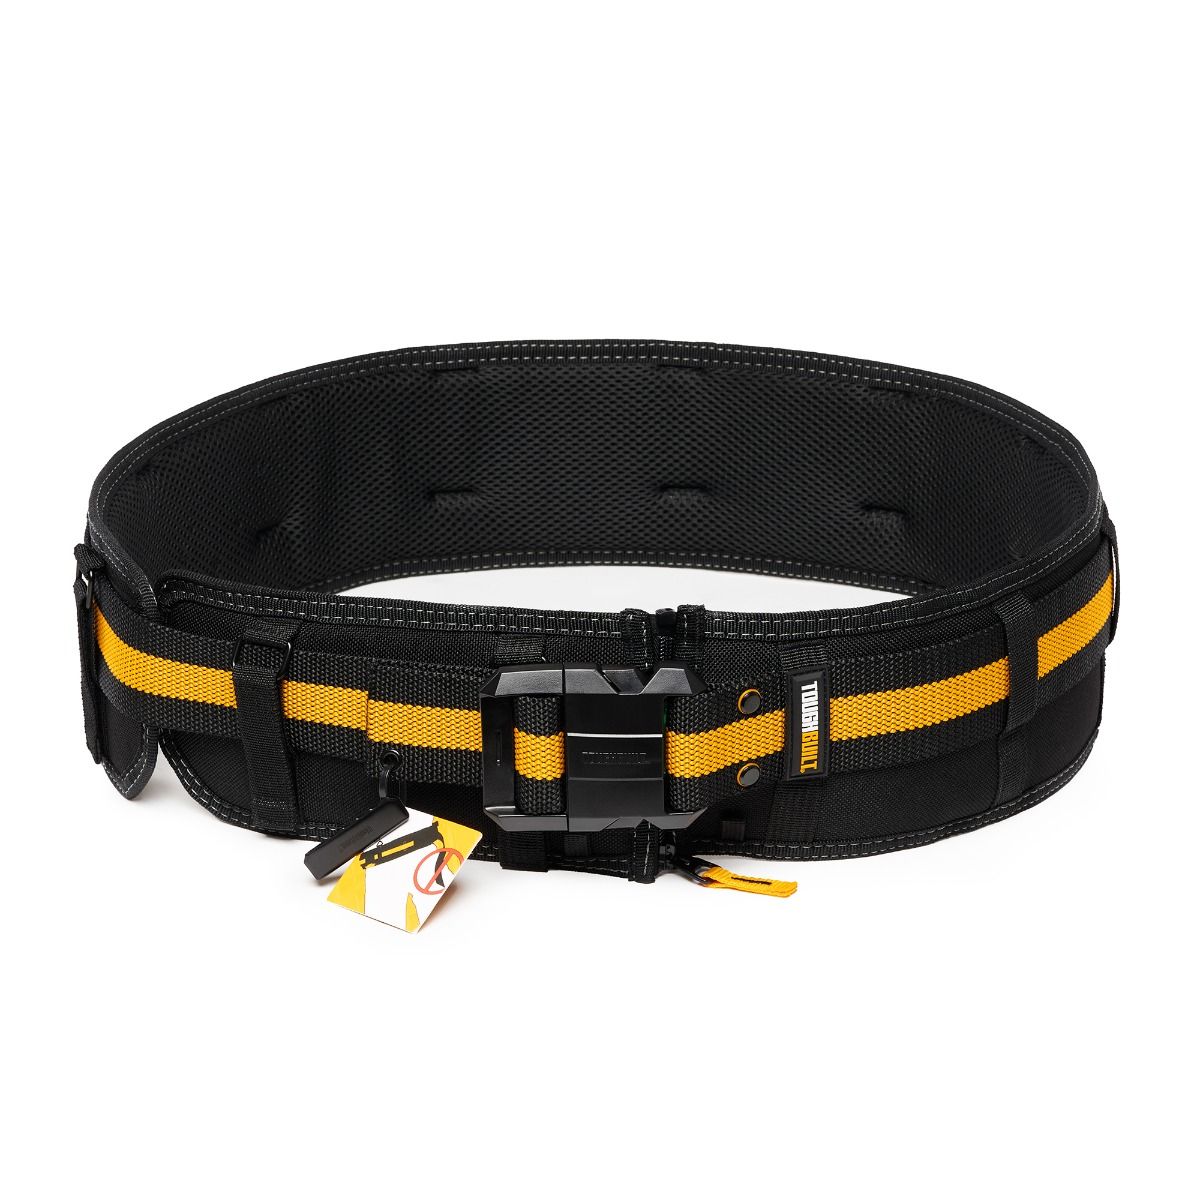 Toughbuilt TB-CT-41 Heavy Duty Clip Padded Belt With Back Support